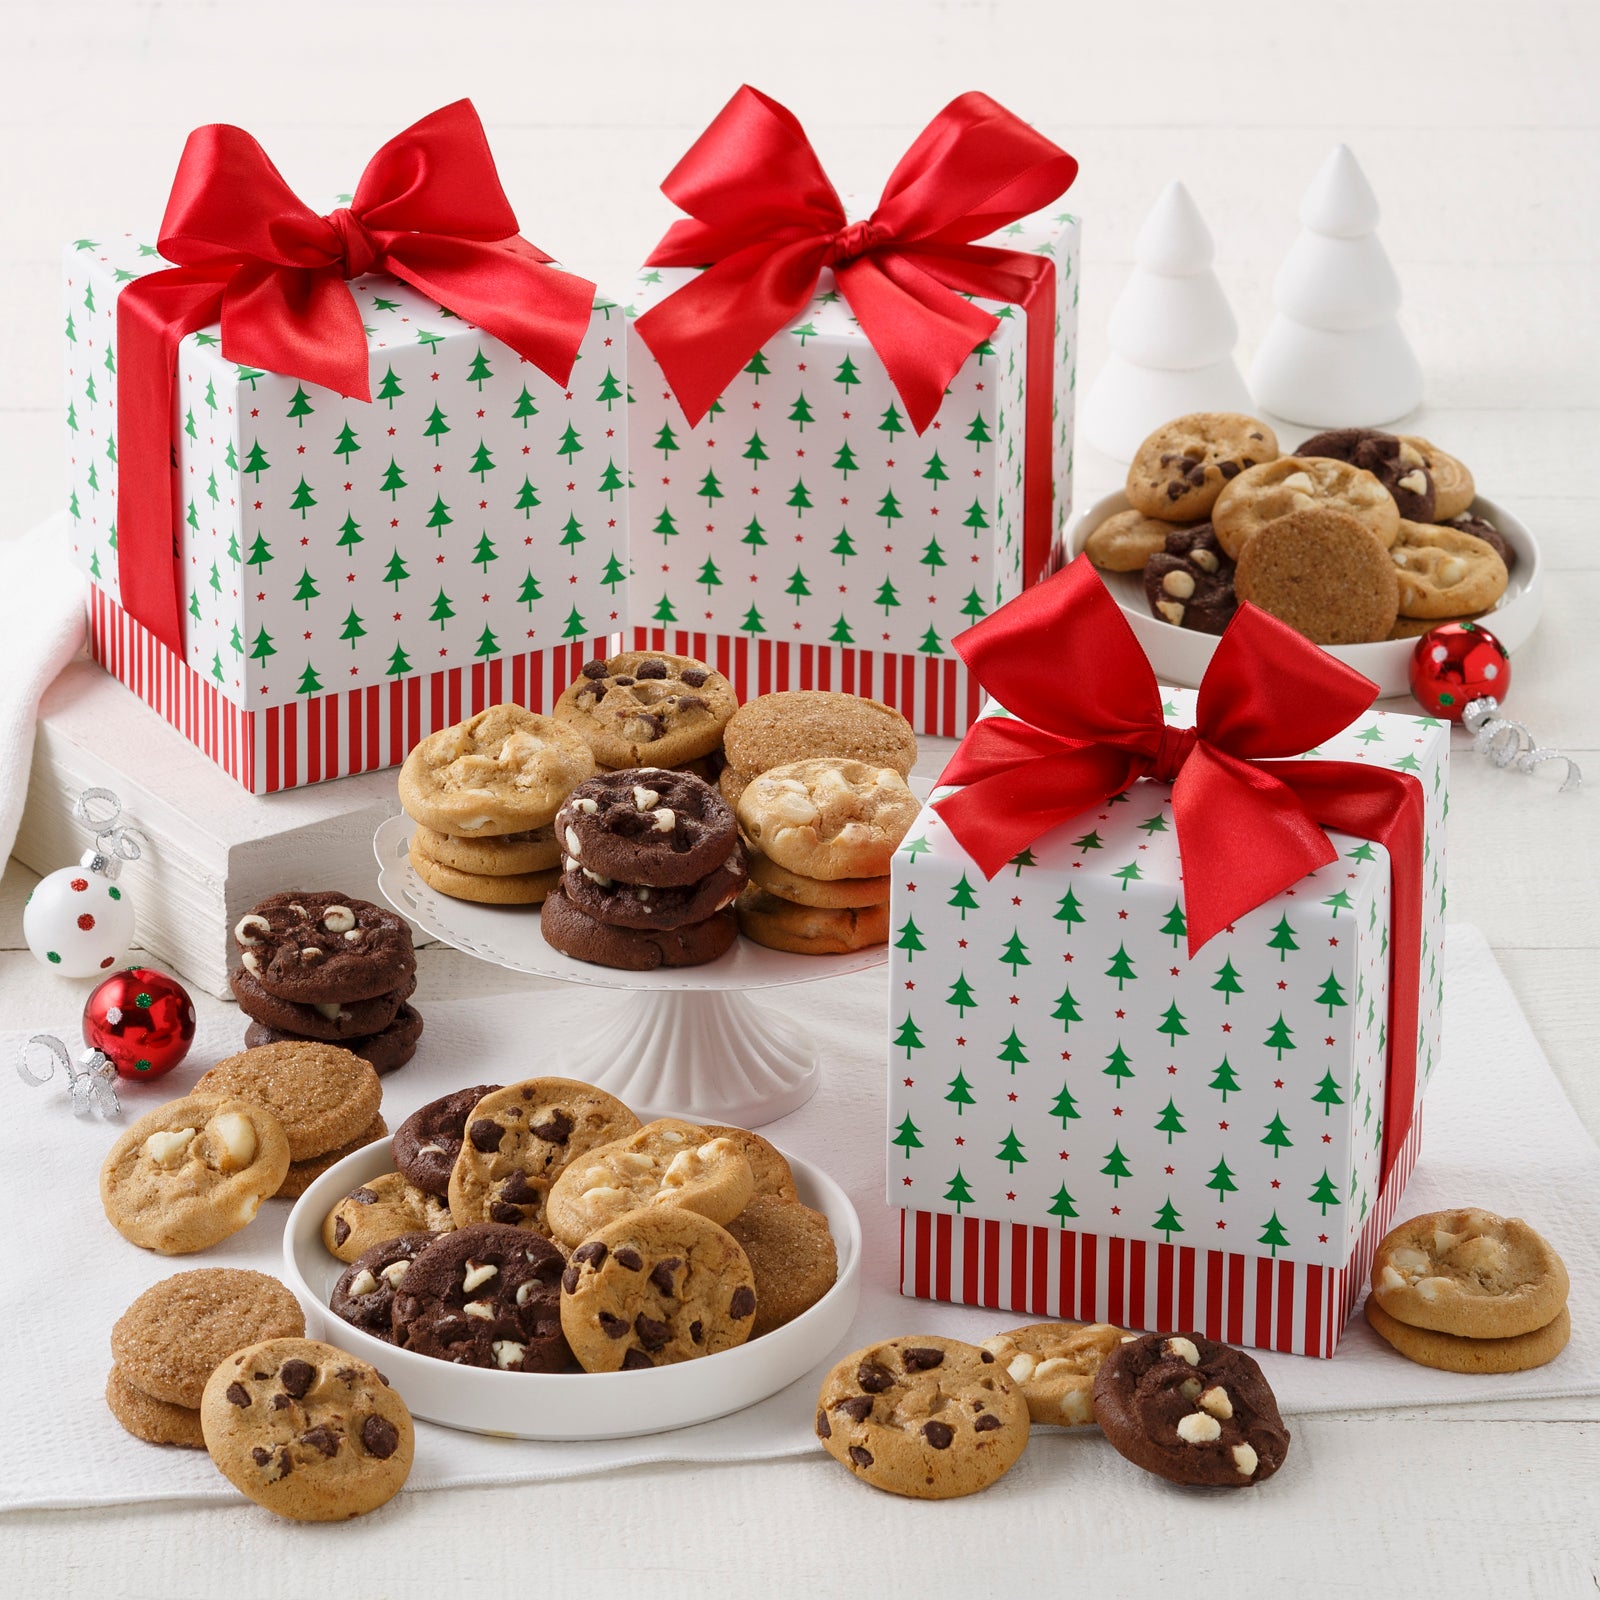 3 Mini gift boxes with Christmas trees on the top and a red and white striped base. There is an assortment of Nibblers® surrounding the gift box